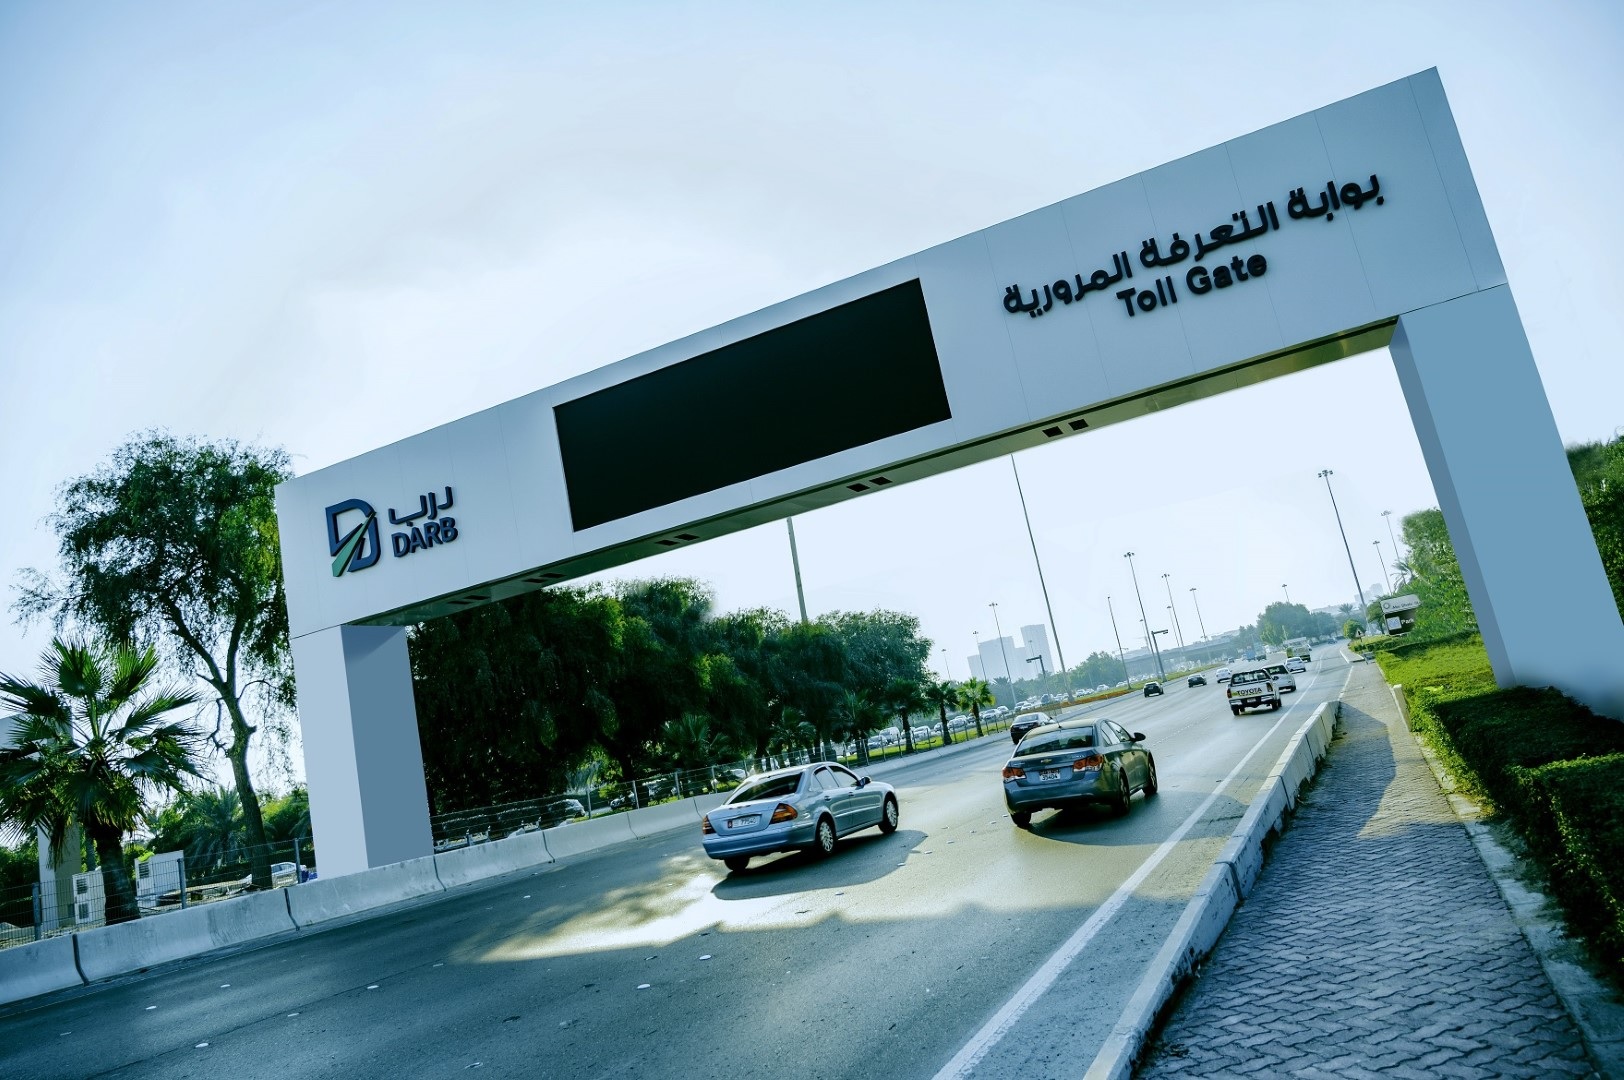 Know the fines in Abu Dhabi Darb tolls - The Filipino Times